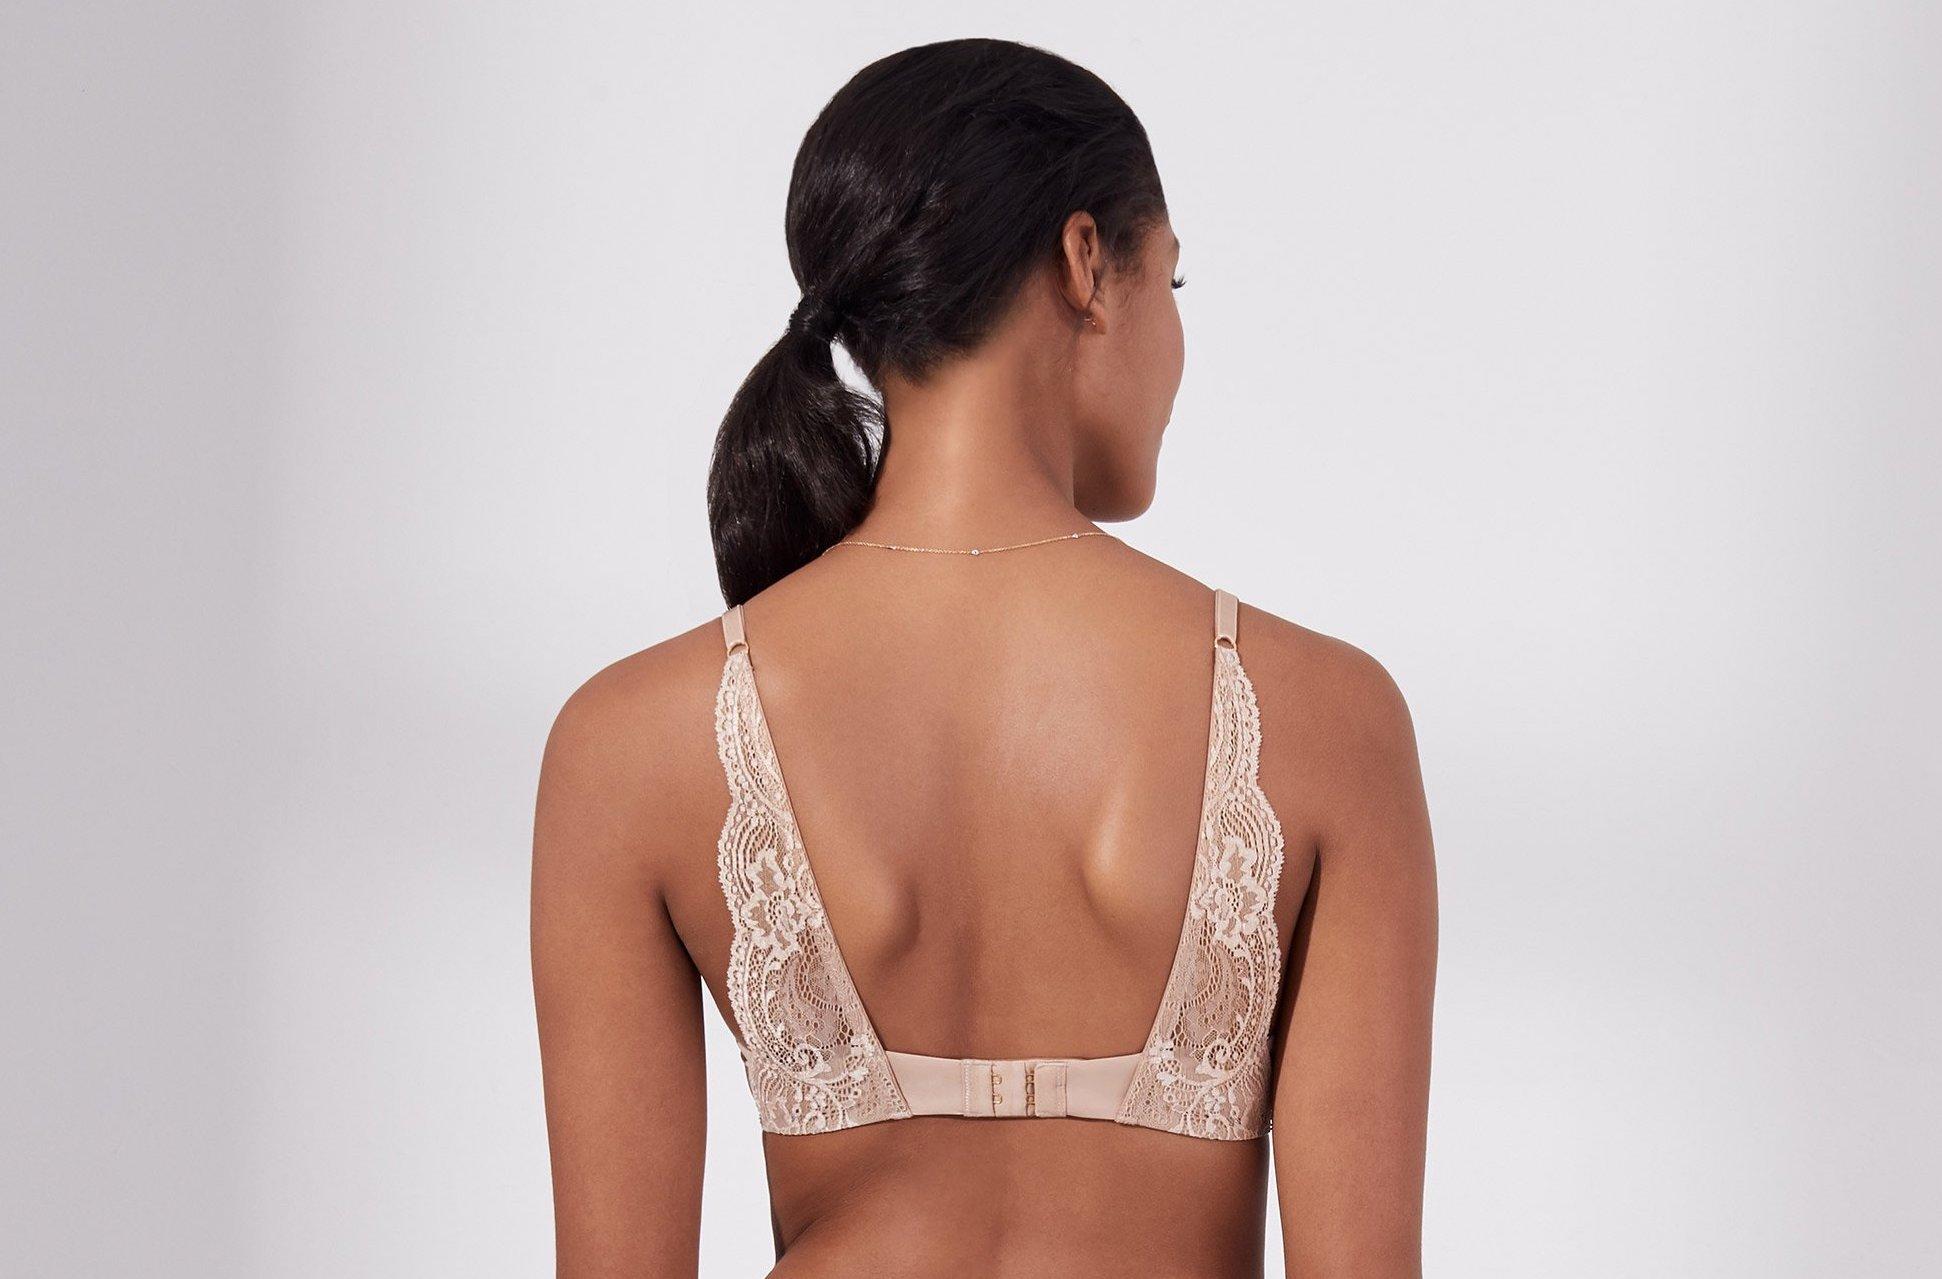 Third Love: Back In Stock Bras (but not for long…)